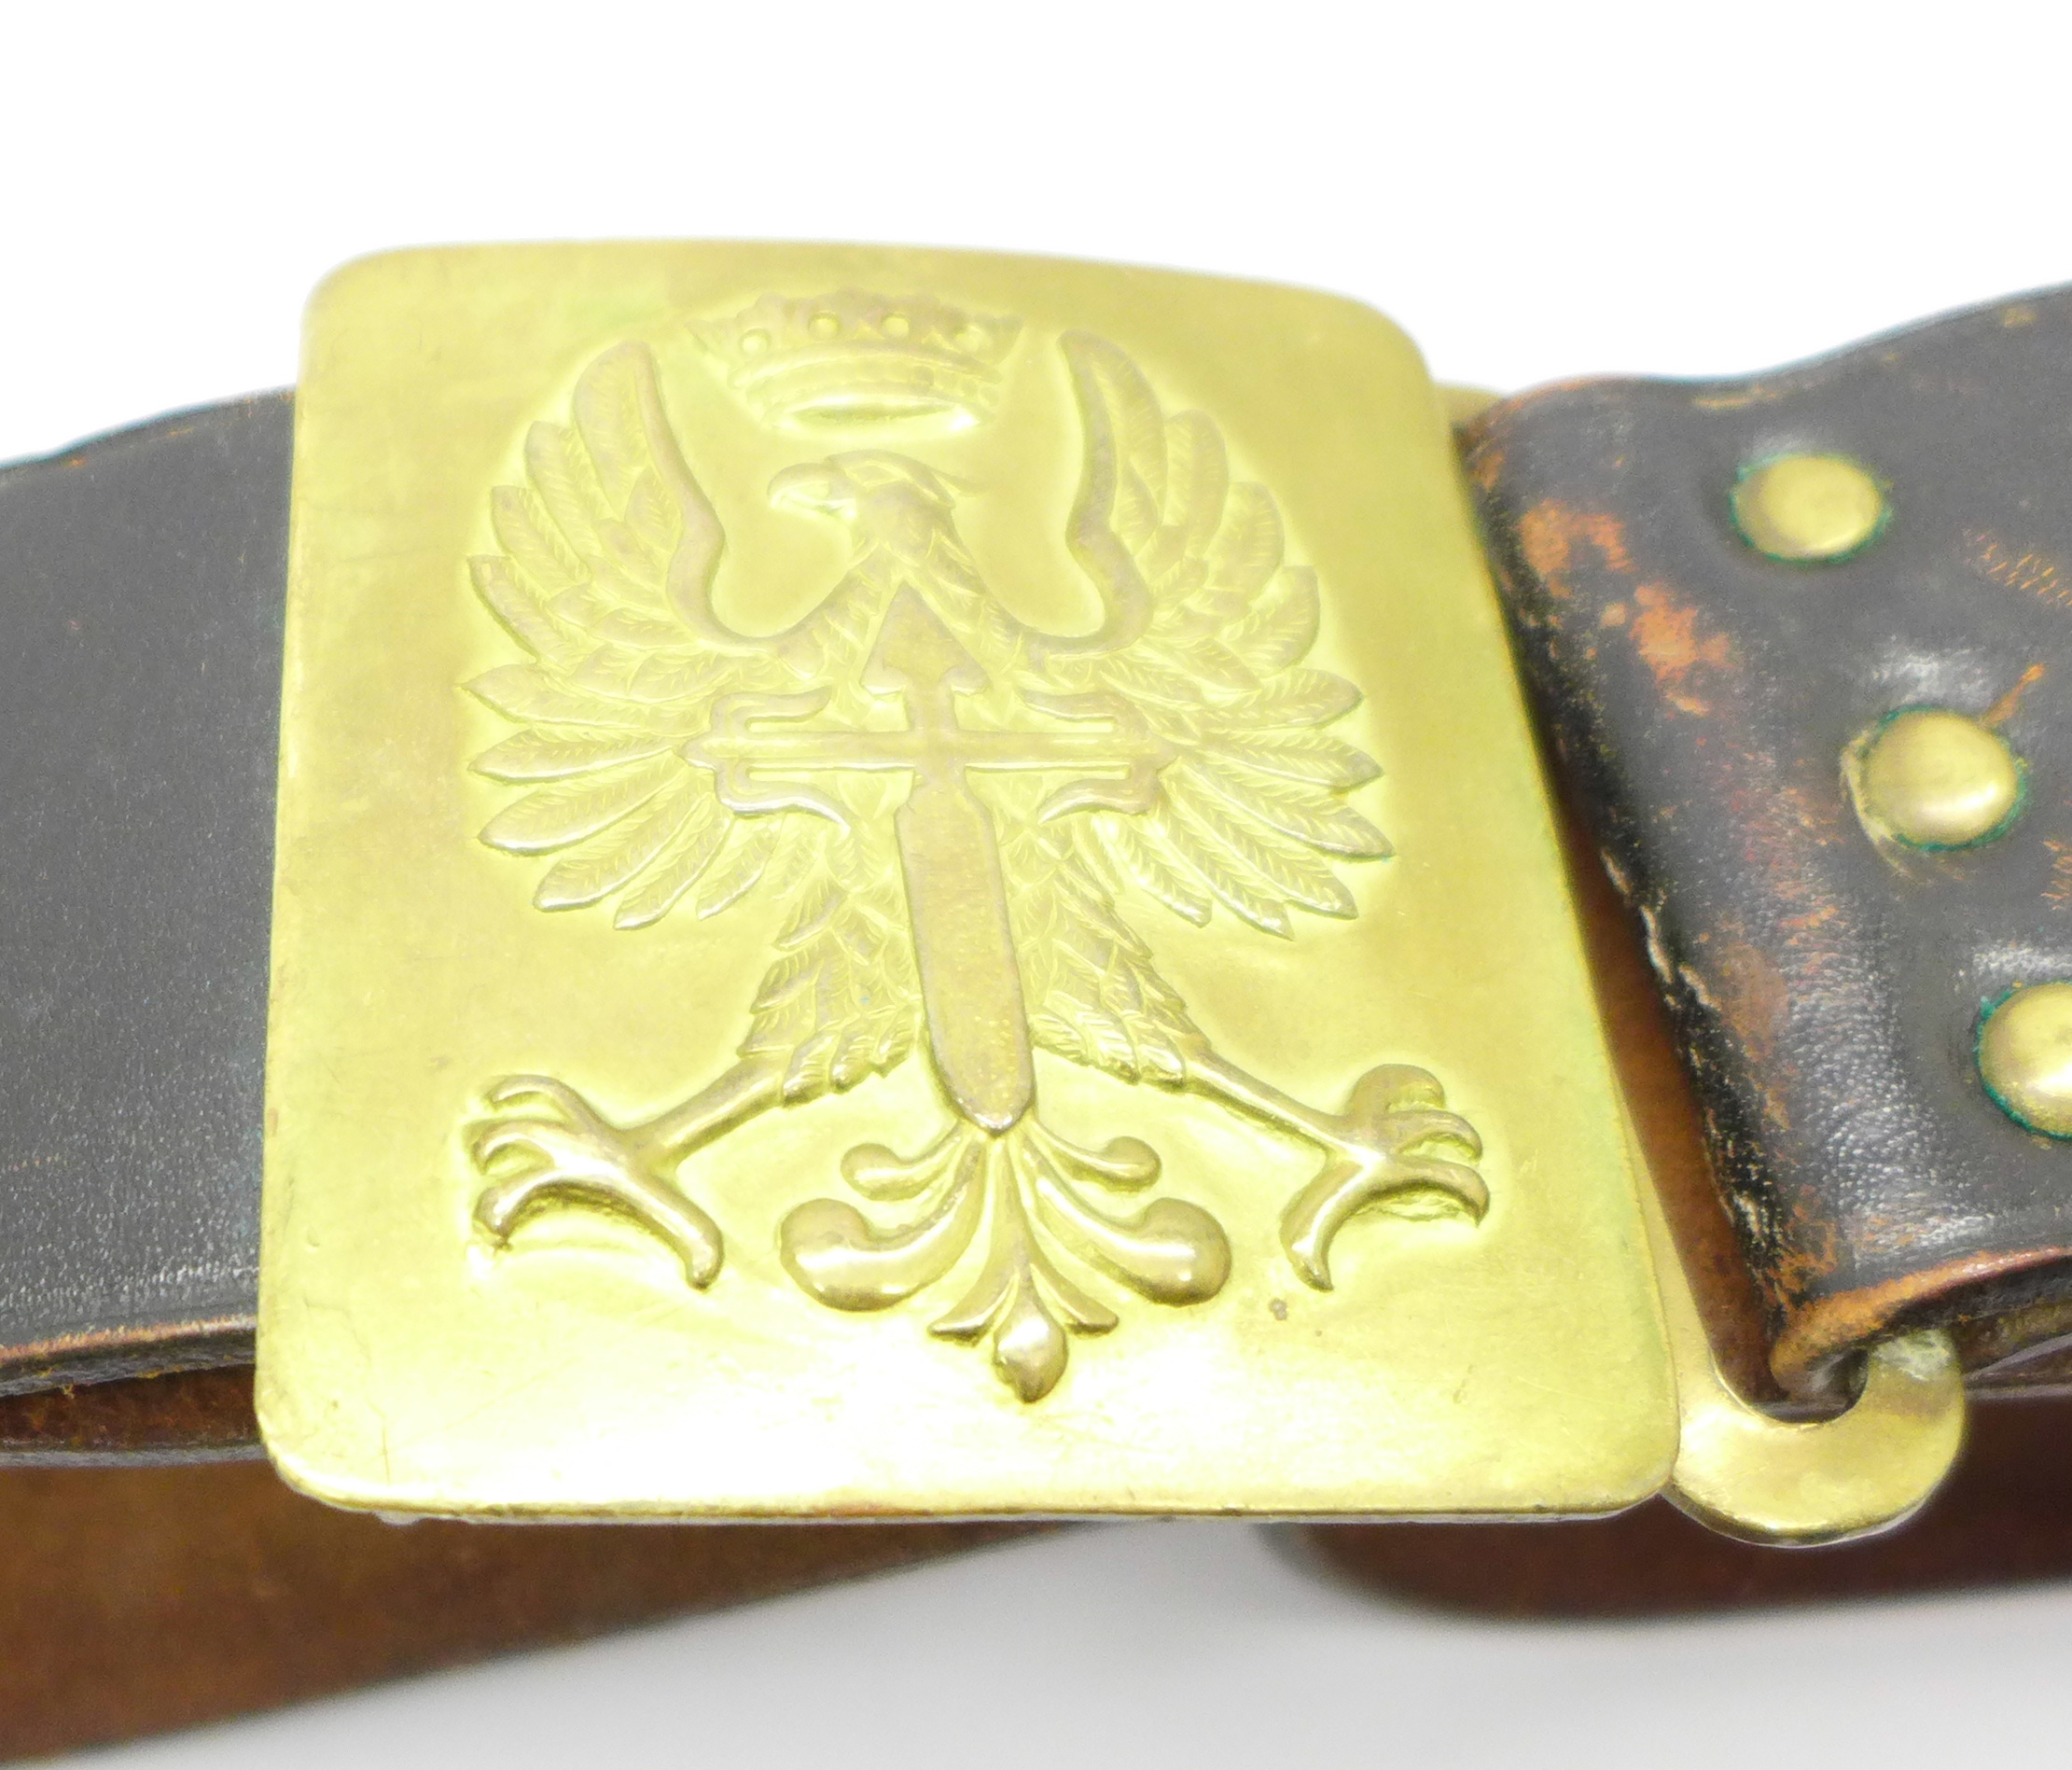 A Spanish military belt with buckle, - Image 2 of 5